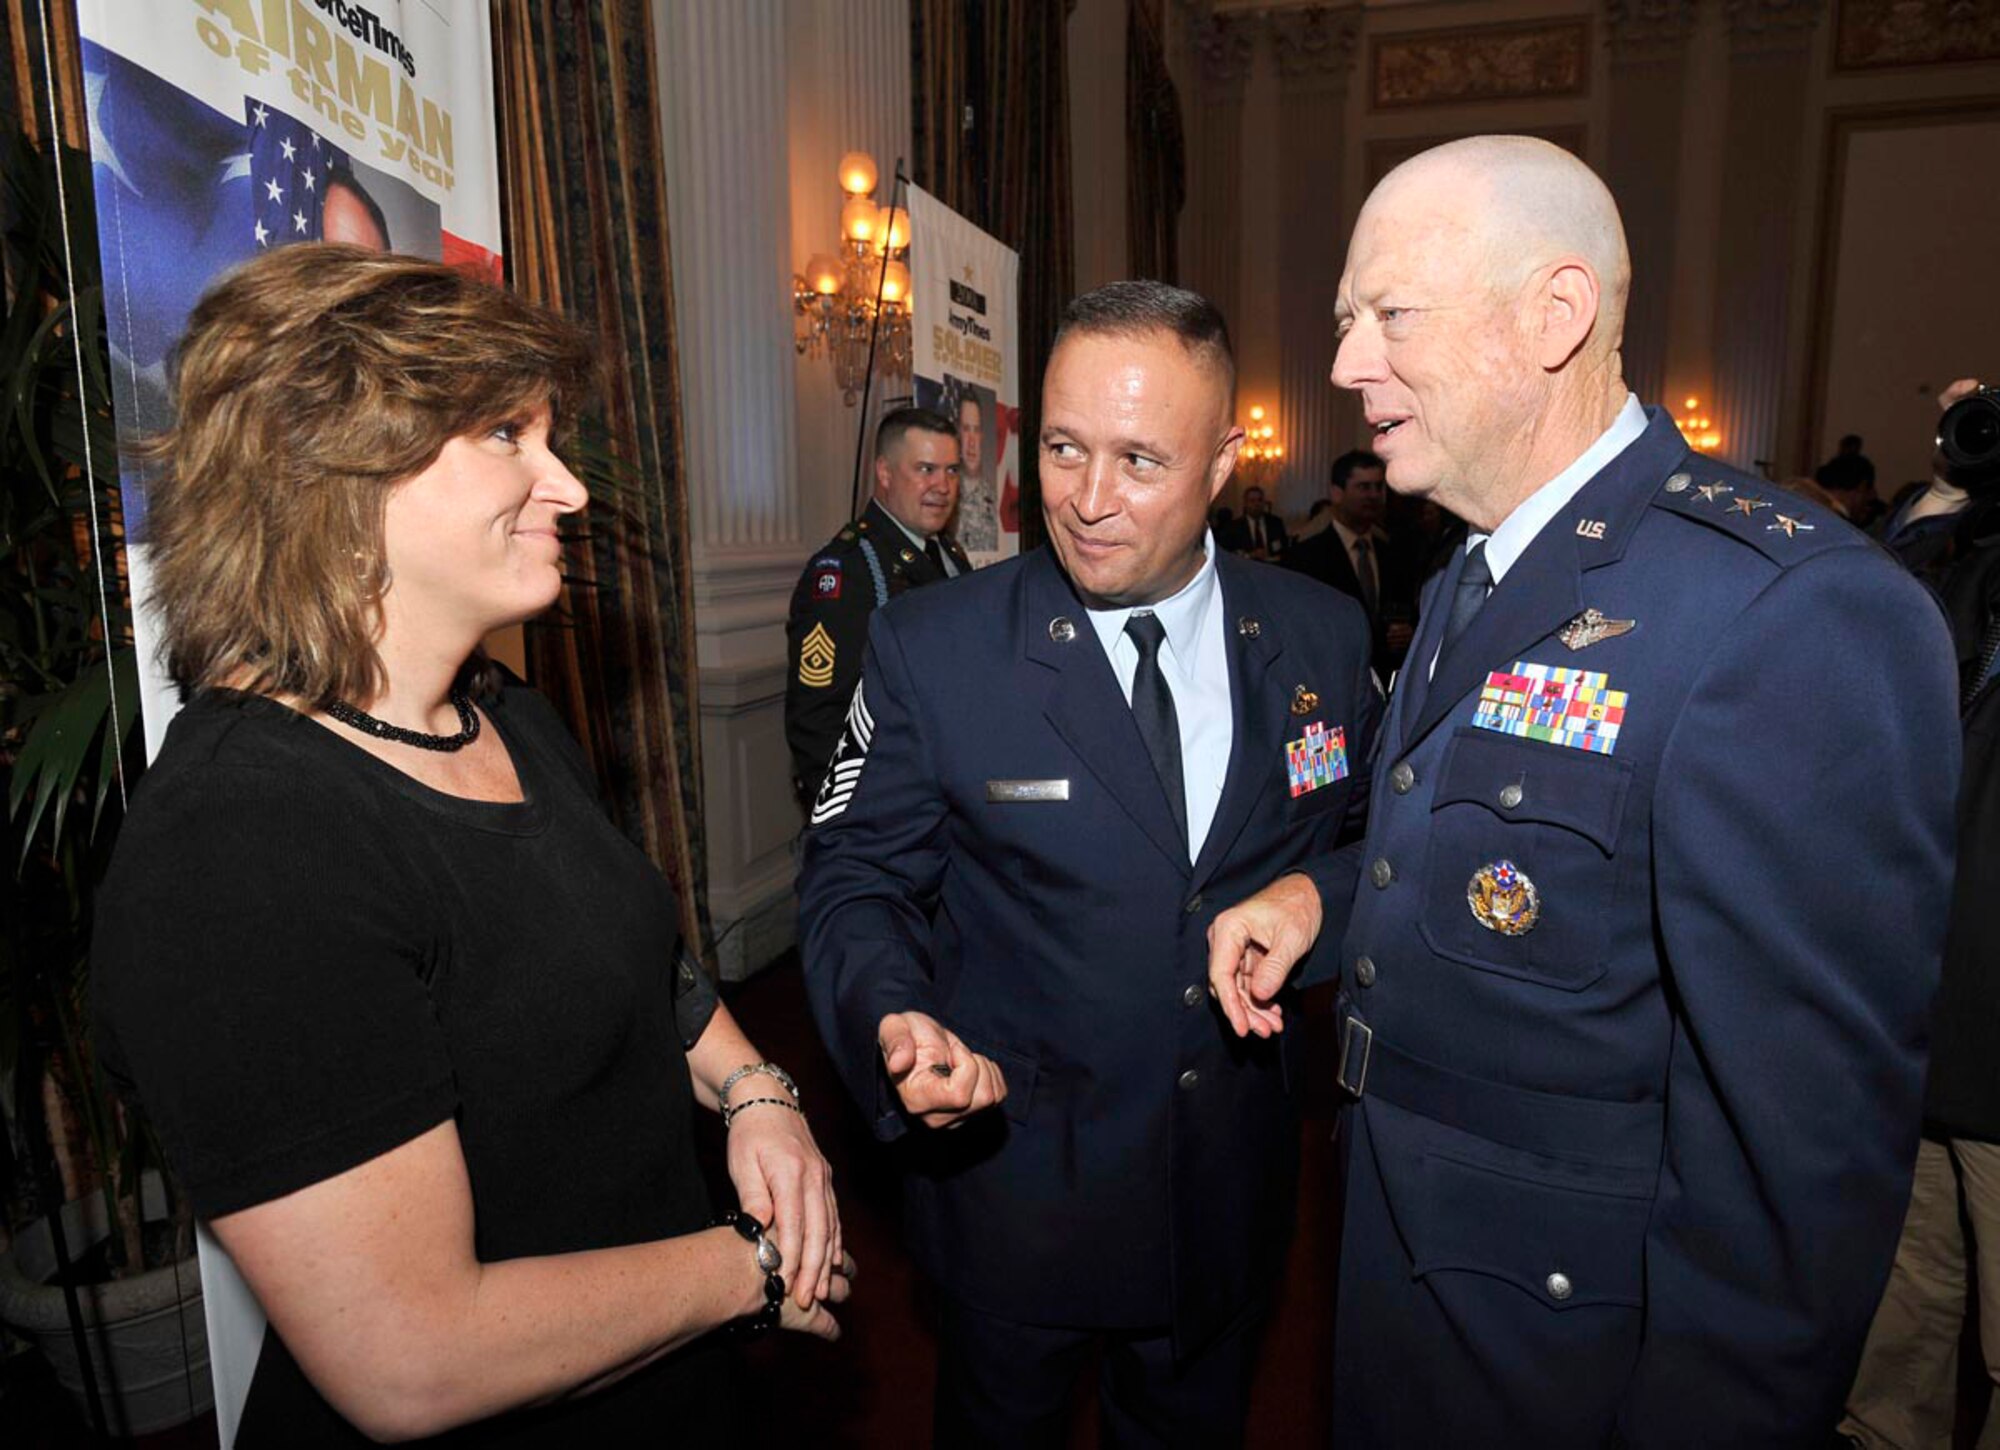 Chief Master Sgt. Stephen Page and his wife speak with Air Force Surgeon General Lt. Gen. Jim Roudebush at an awards reception July 30 in Washington, D.C. Chief Page was recognized as the Air Force Times newspaper's Airman of the Year. (U.S. Air Force photo/Scott M. Ash)